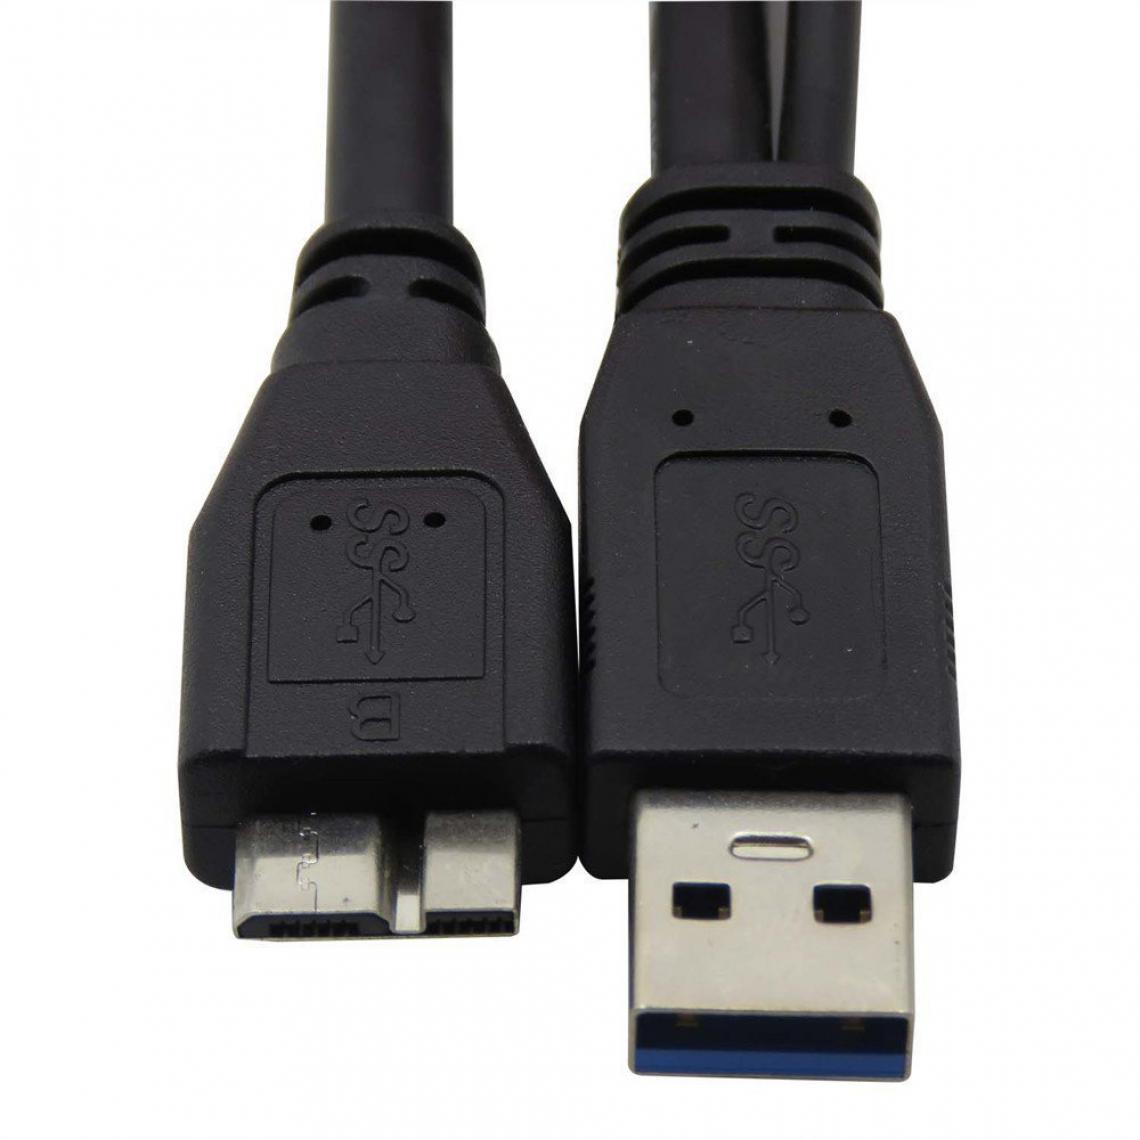 Ineck - INECK - Cable USB Micro B "SuperSpeed" 3.0 - 1,8M - Connecteurs Male / Male - Type - Câble antenne